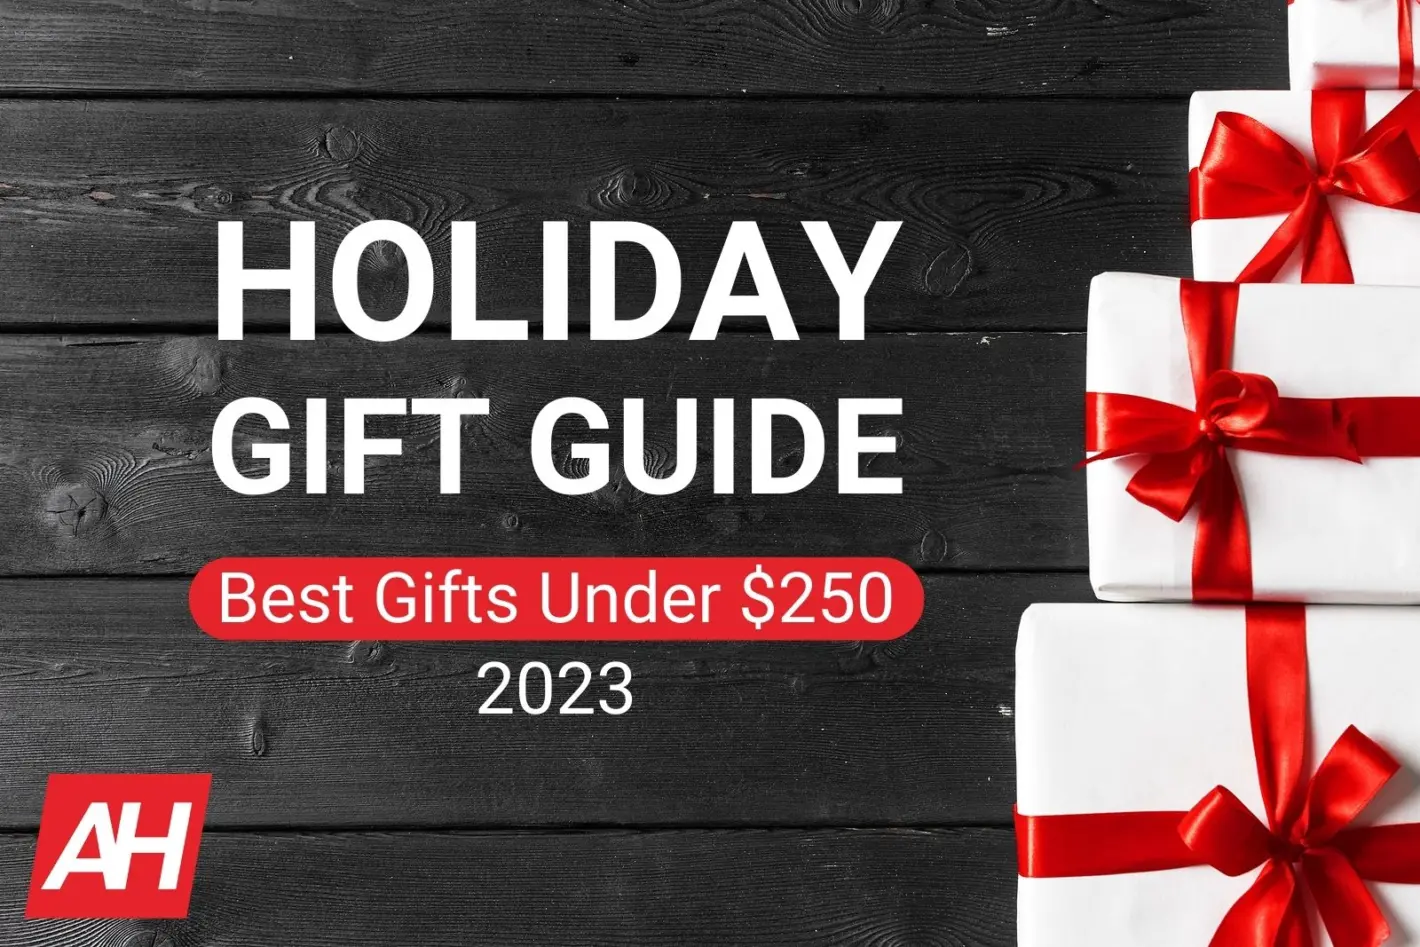 Featured image for Holiday Gift Guide 2023: Best Gifts Under $250